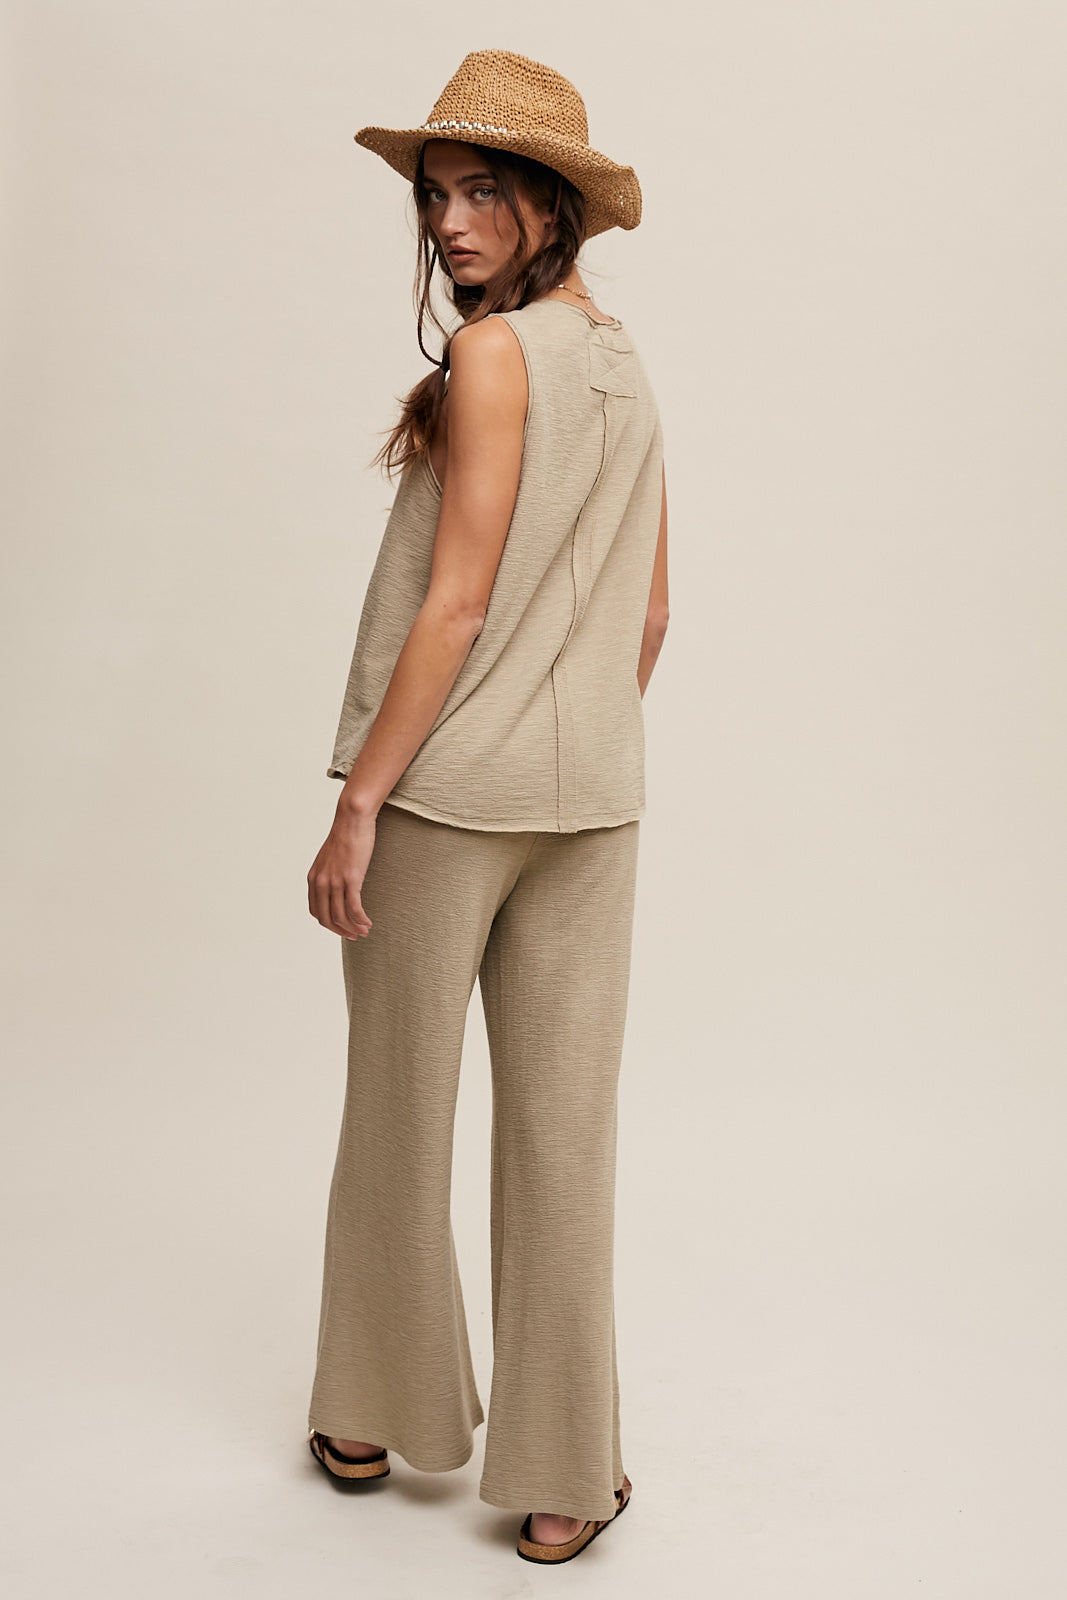 Soft Knit Tank and Sweatpant Set in Light Olive